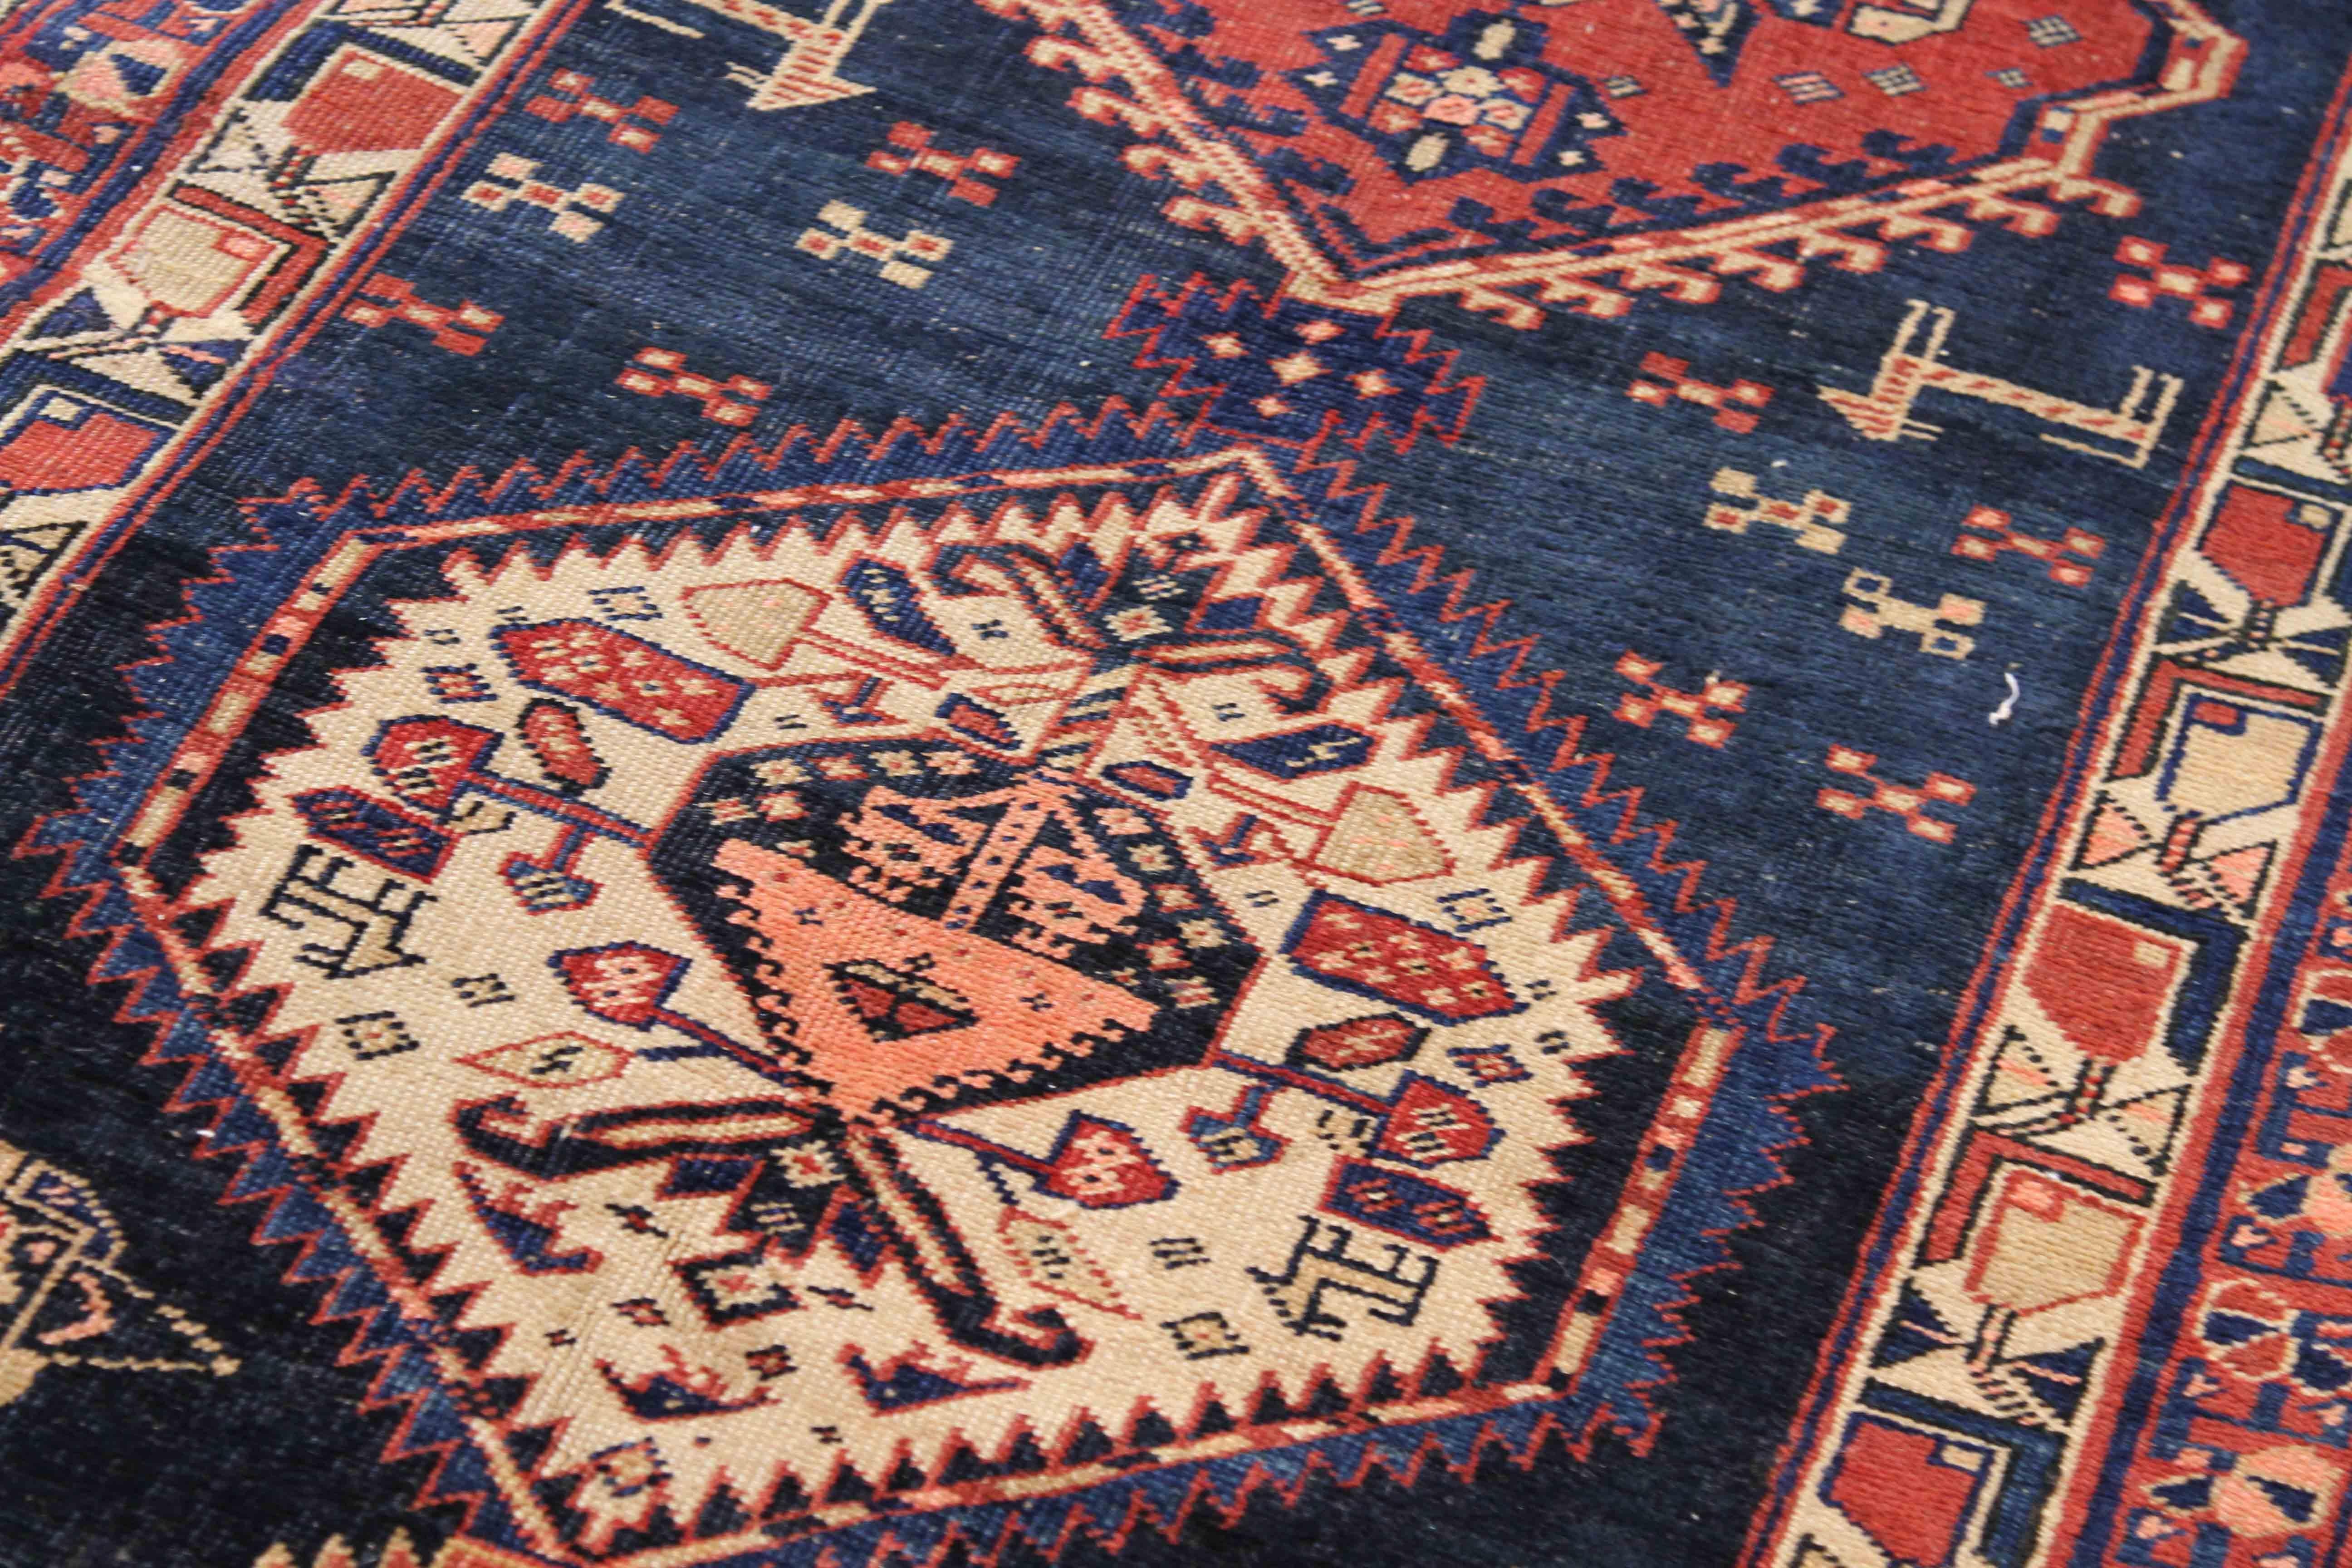 Antique Persian Rug Azerbaijan Design with Magnificent Jewel Patterns circa 1900 In Excellent Condition For Sale In Dallas, TX